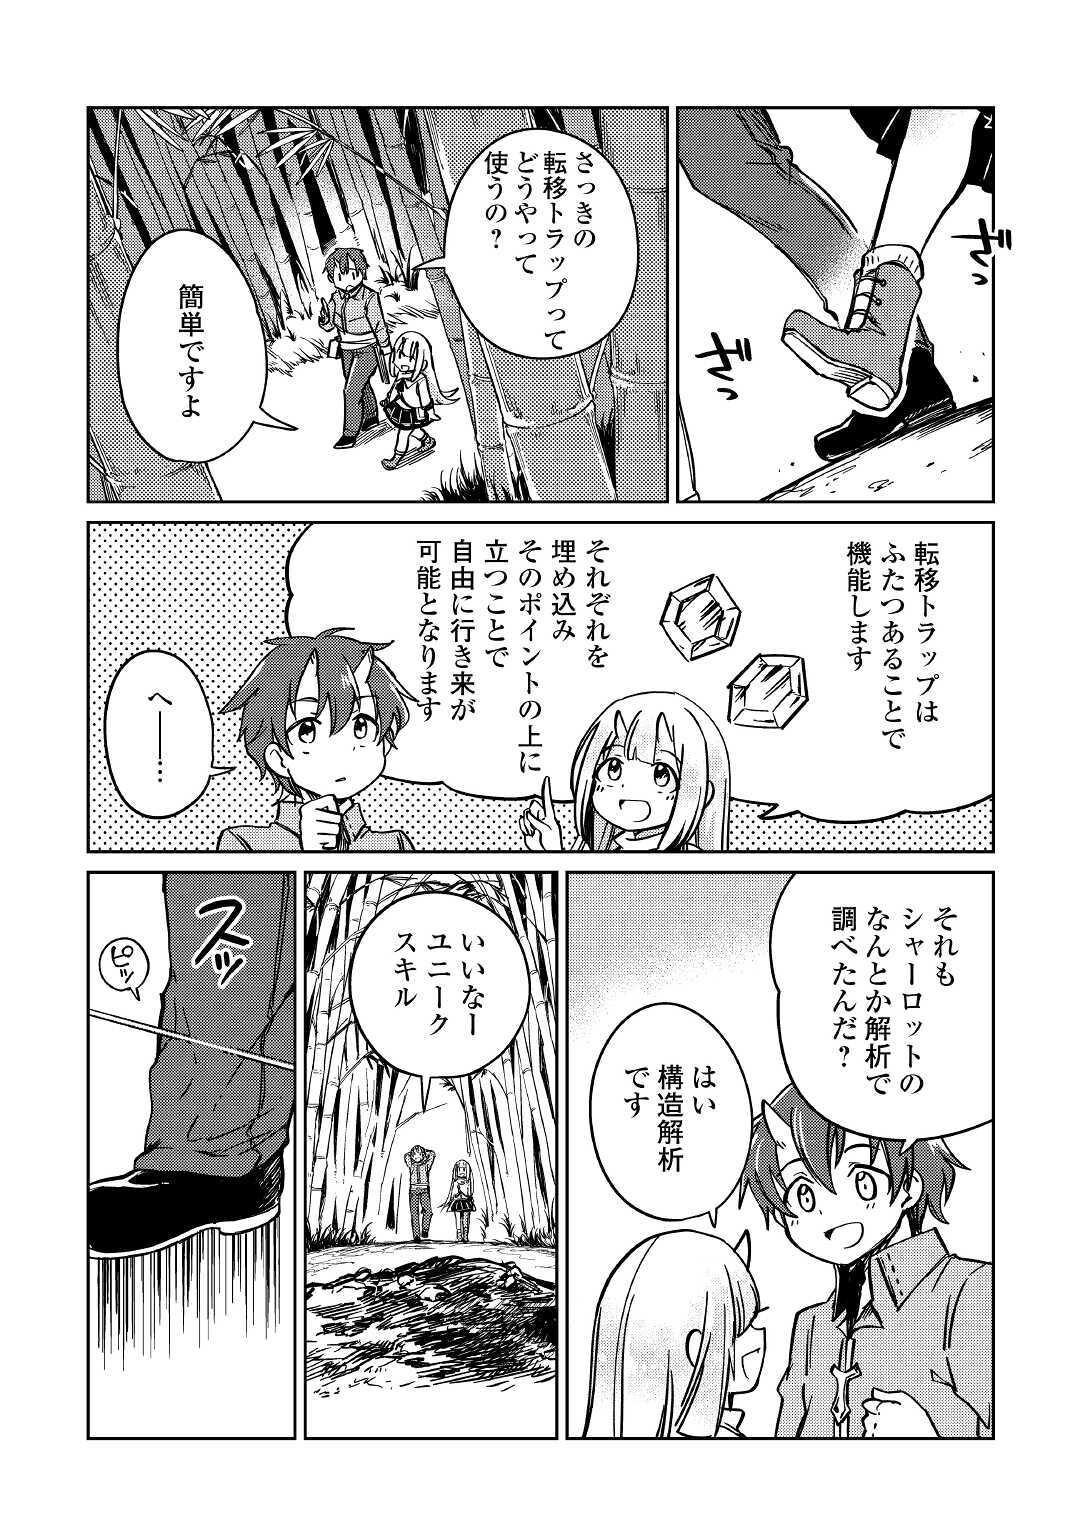 The Former Structural Researcher’s Story of Otherworldly Adventure 第29話 - Page 15